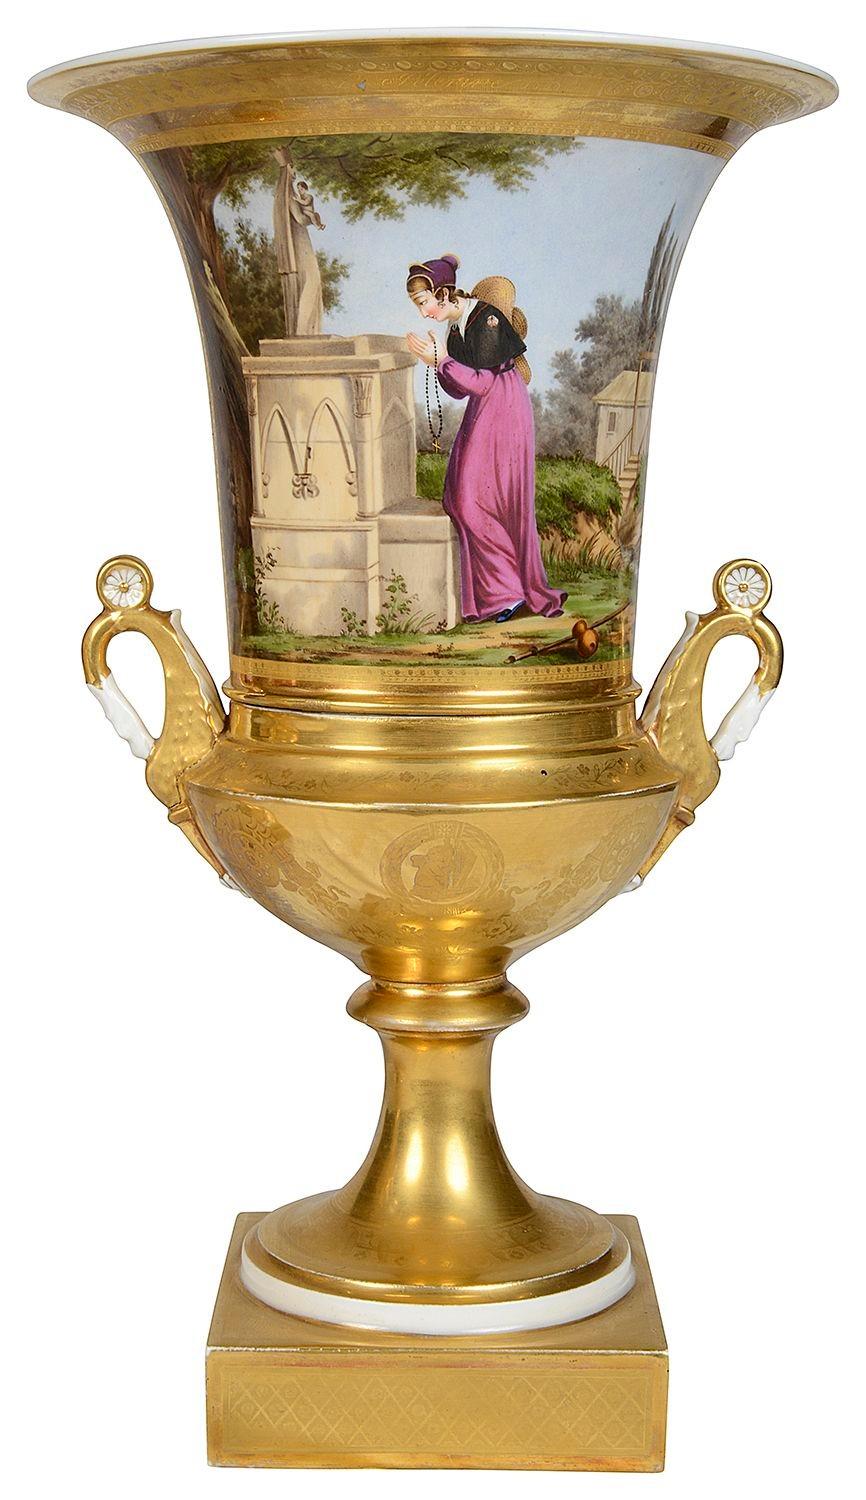 A fine quality pair of late 19th Century French Paris porcelain two handle urns. Each depicting classical hand painted scenes of a praying Maiden and a musician. Set between a beautifully gilded ground above and below.
 
Batch 7460662. DLBYN